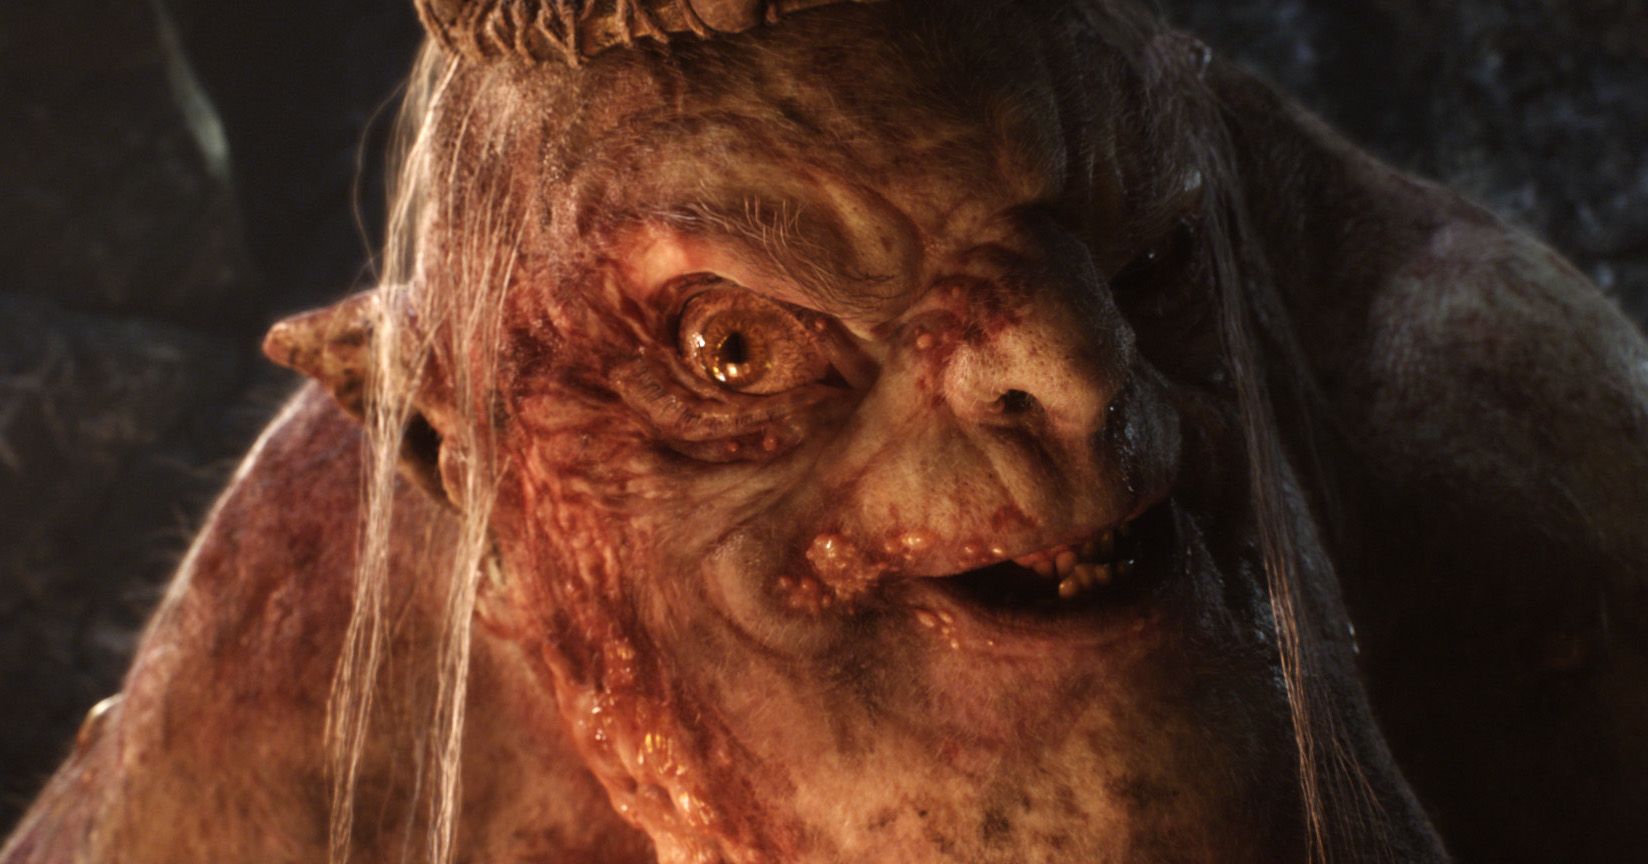 The Great Goblin in The Hobbit: An Unexpected Journey